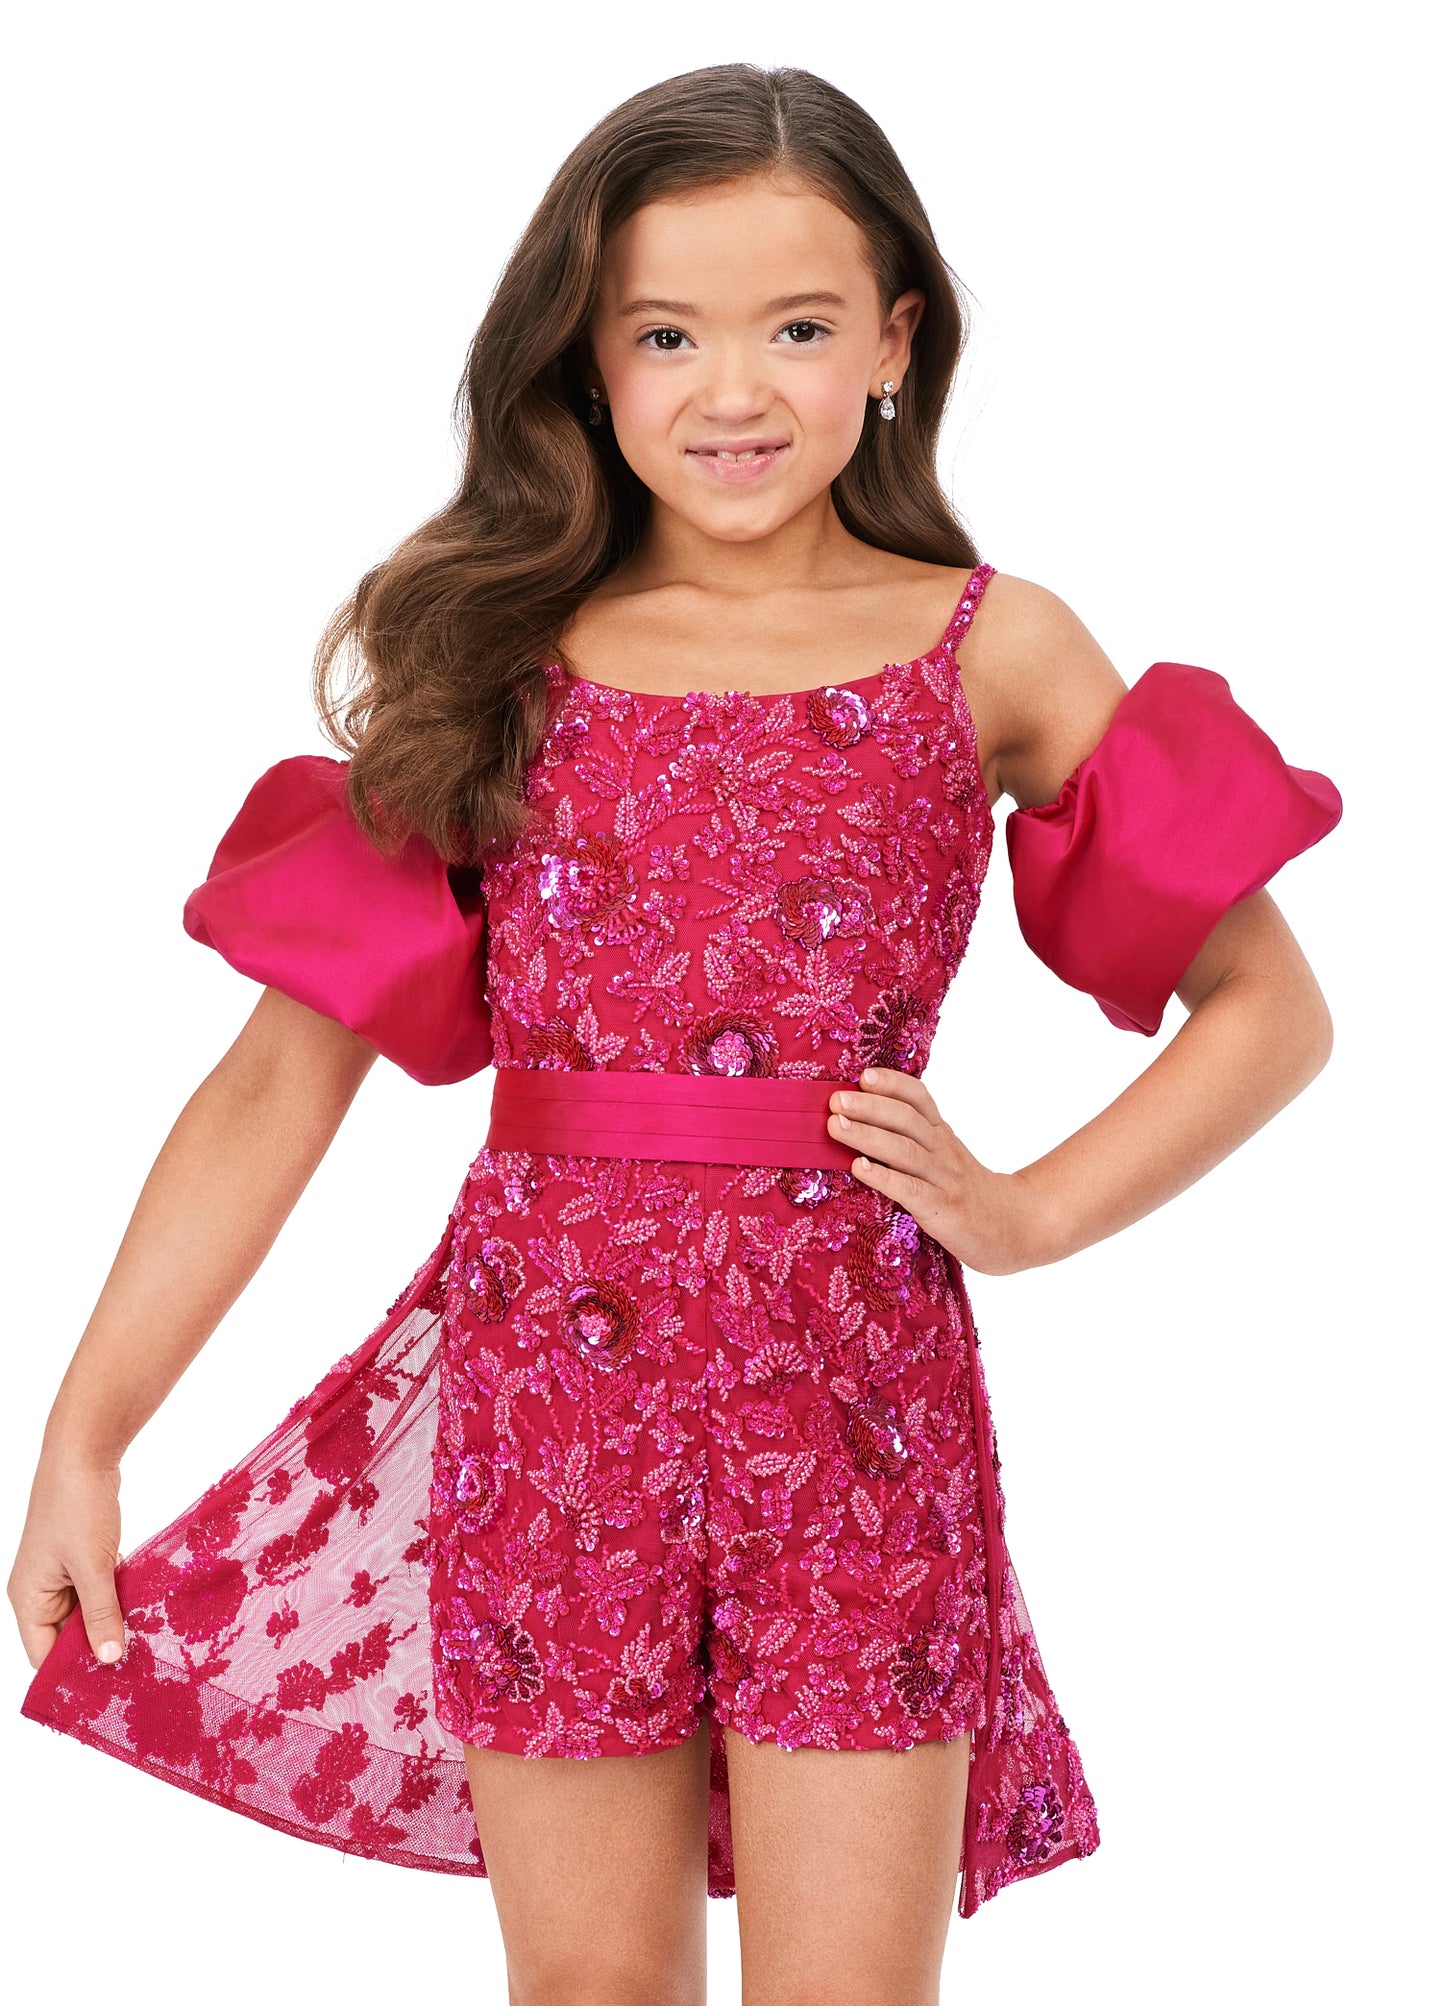 Ashley Lauren Kids 8233 Fully Beaded Spaghetti Straps With Detachable Puff Sleeves Detachable Overskirt Romper. Have the most fun in this beaded romper complete with detachable puff sleeves and an overskirt!